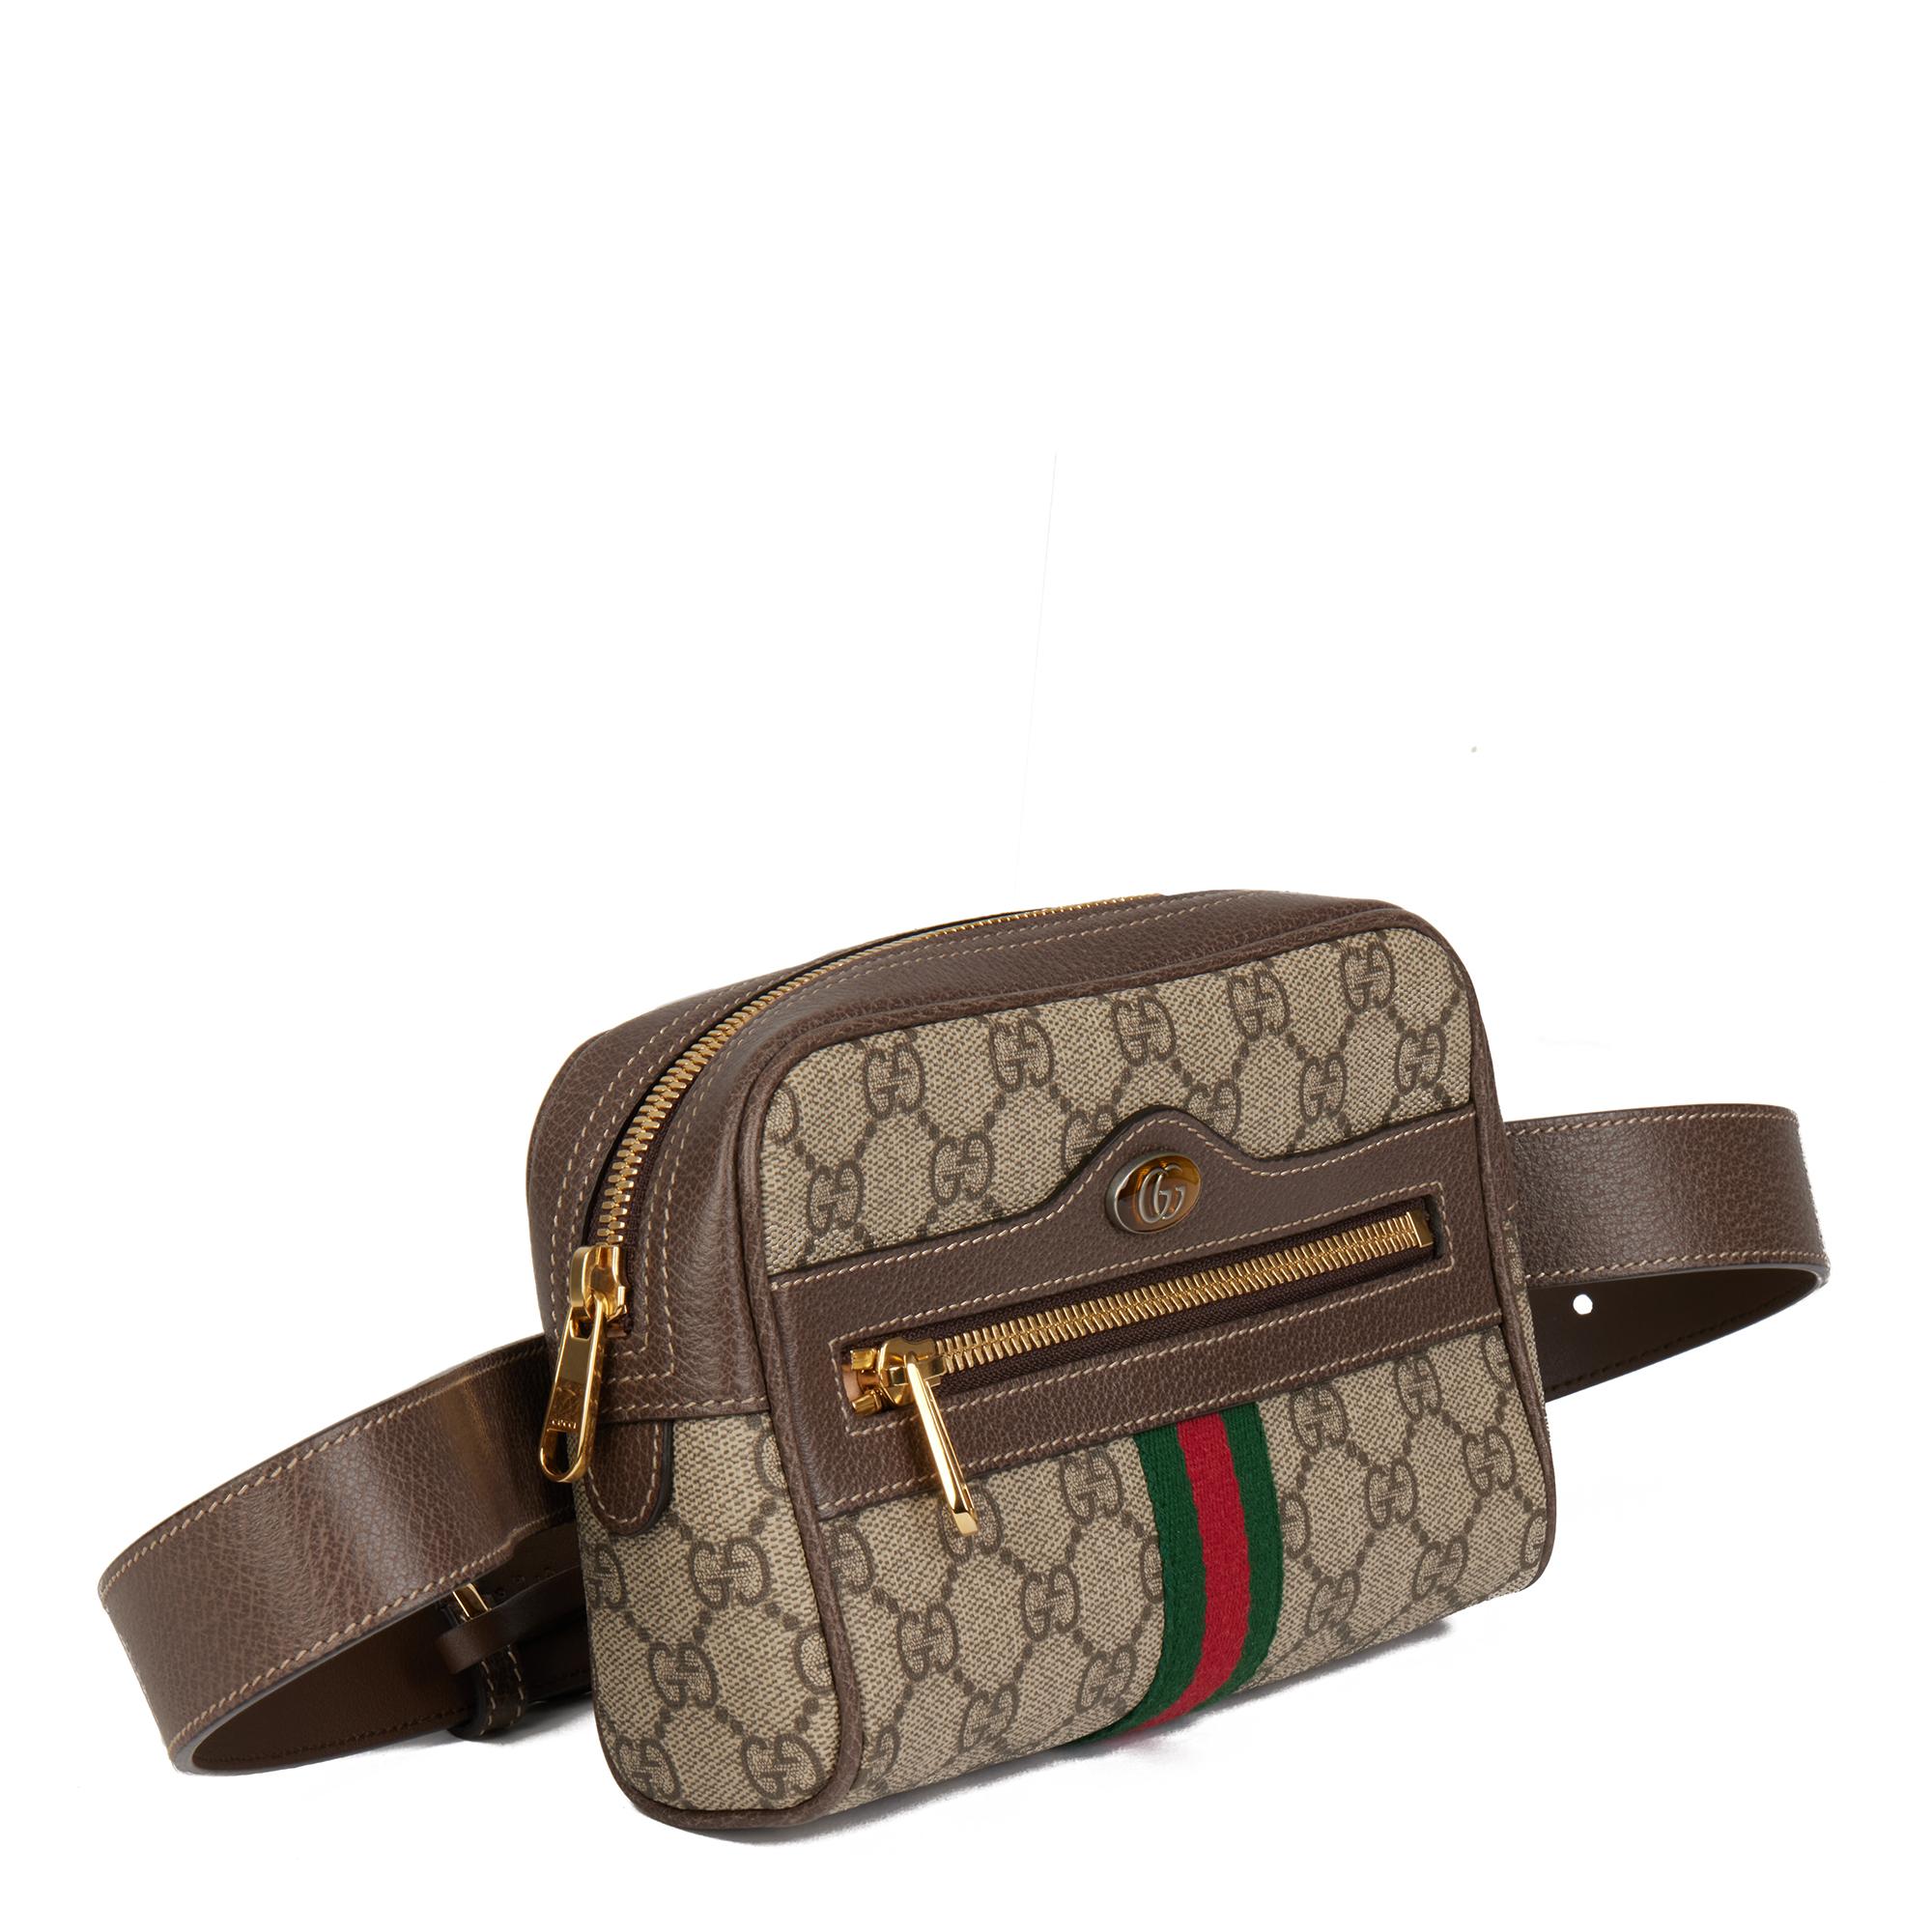 GUCCI
GG Supreme Canvas & Brown Pigskin Leather Web Small Orphidia Belt Bag

Serial Number: 517076 186628
Age (Circa): 2018
Accompanied By: Gucci Dust Bag, Box, Care Booklet
Authenticity Details: Date Stamp (Made in Italy)
Gender: Ladies
Type: Belt